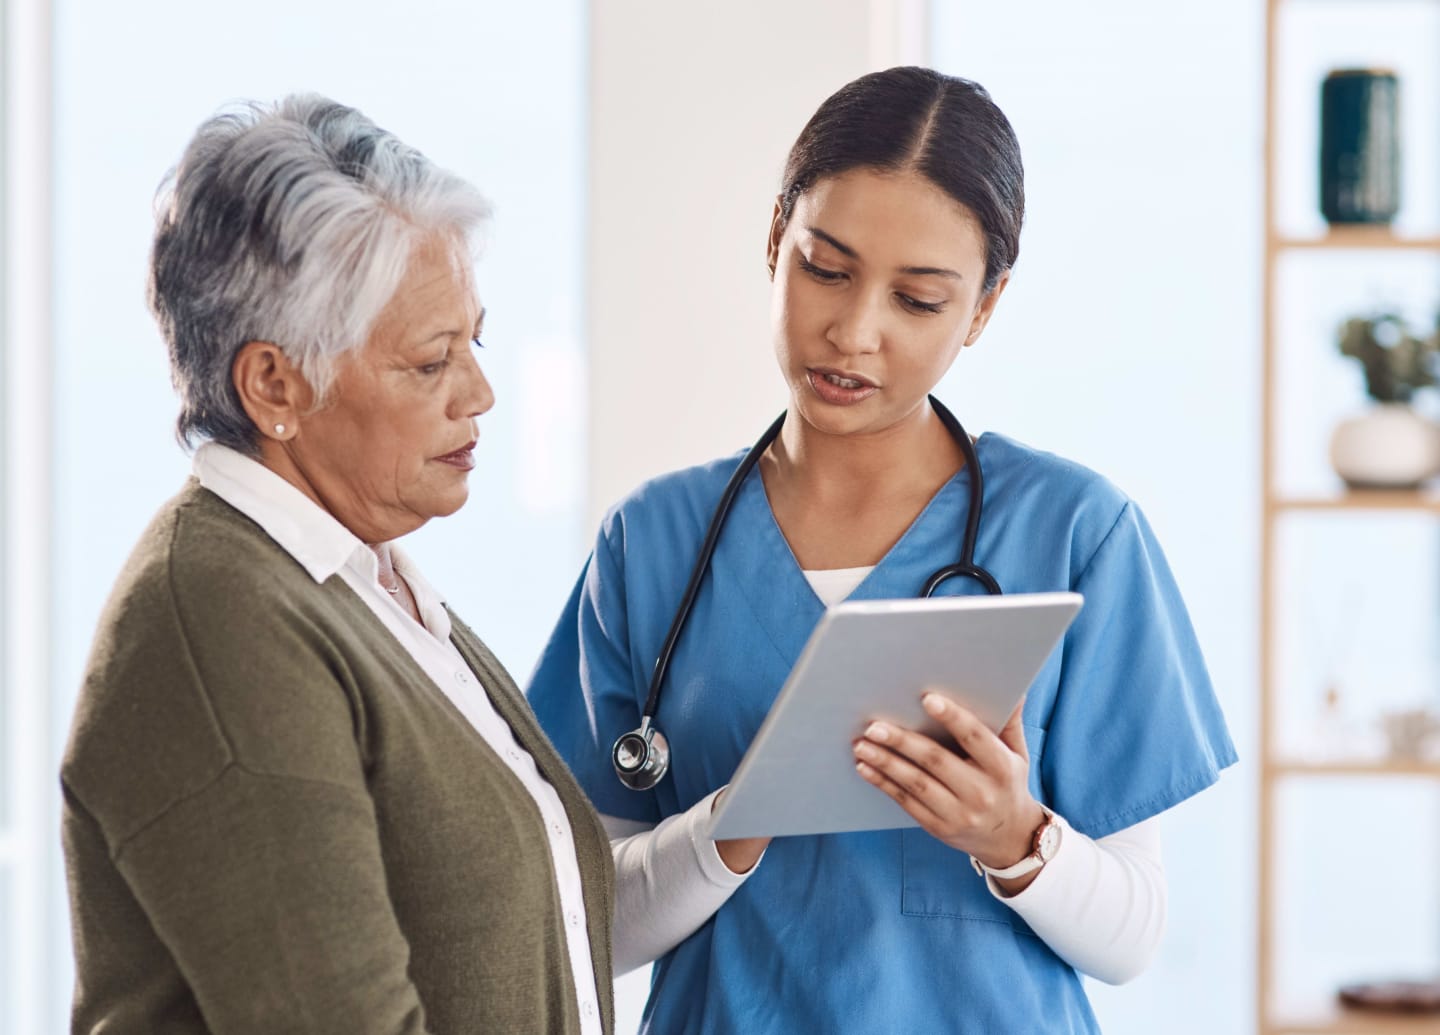 Medical assistant with patient reviewing information on a tablet